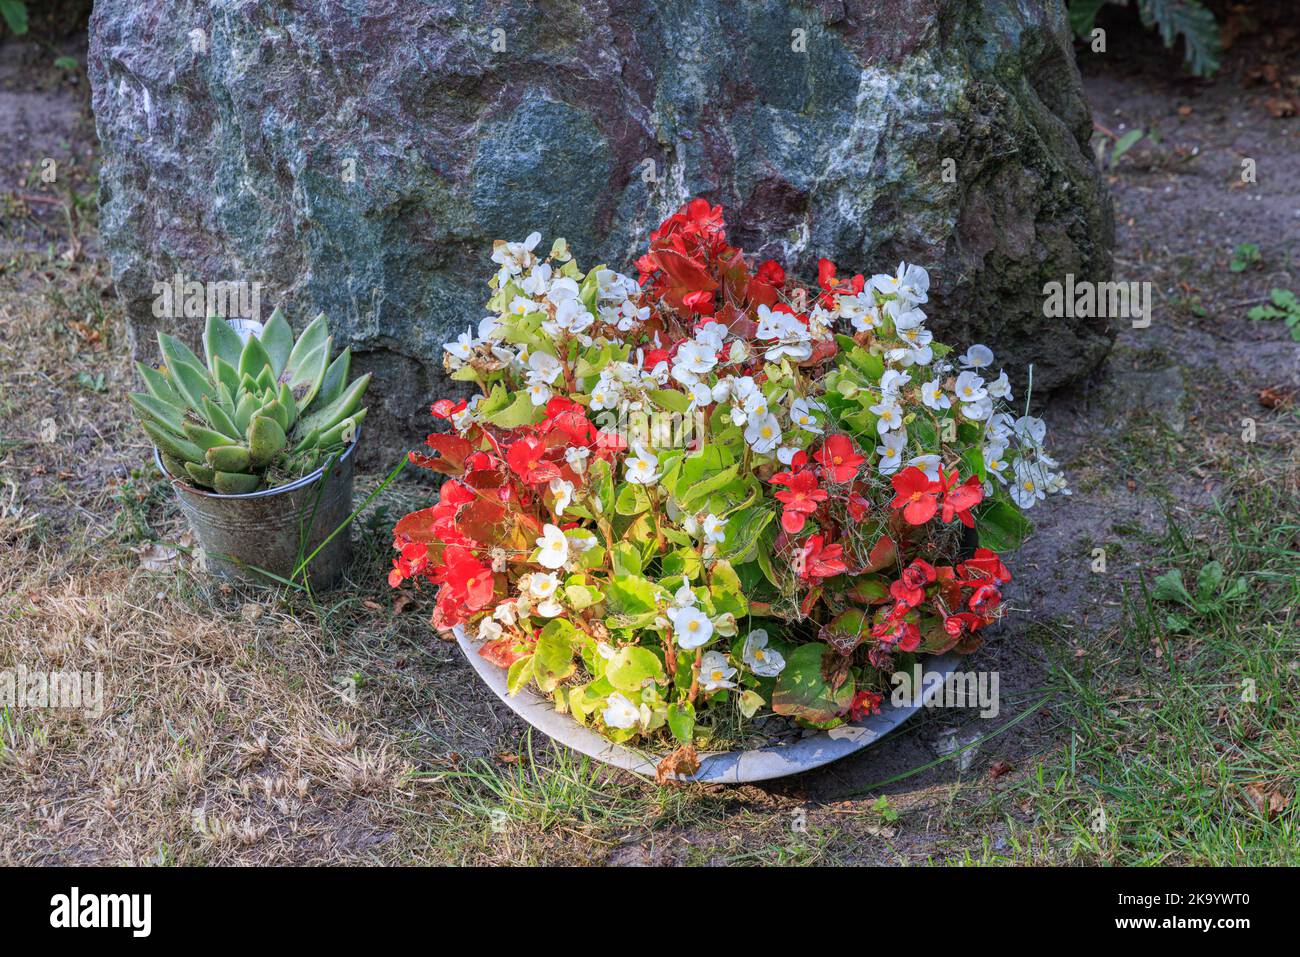 Grave with bowl and colorful begonia plants and socculent plant, at graveyard in Marum in municipality Westerkwartier in Groningen province the Netherlands Stock Photo